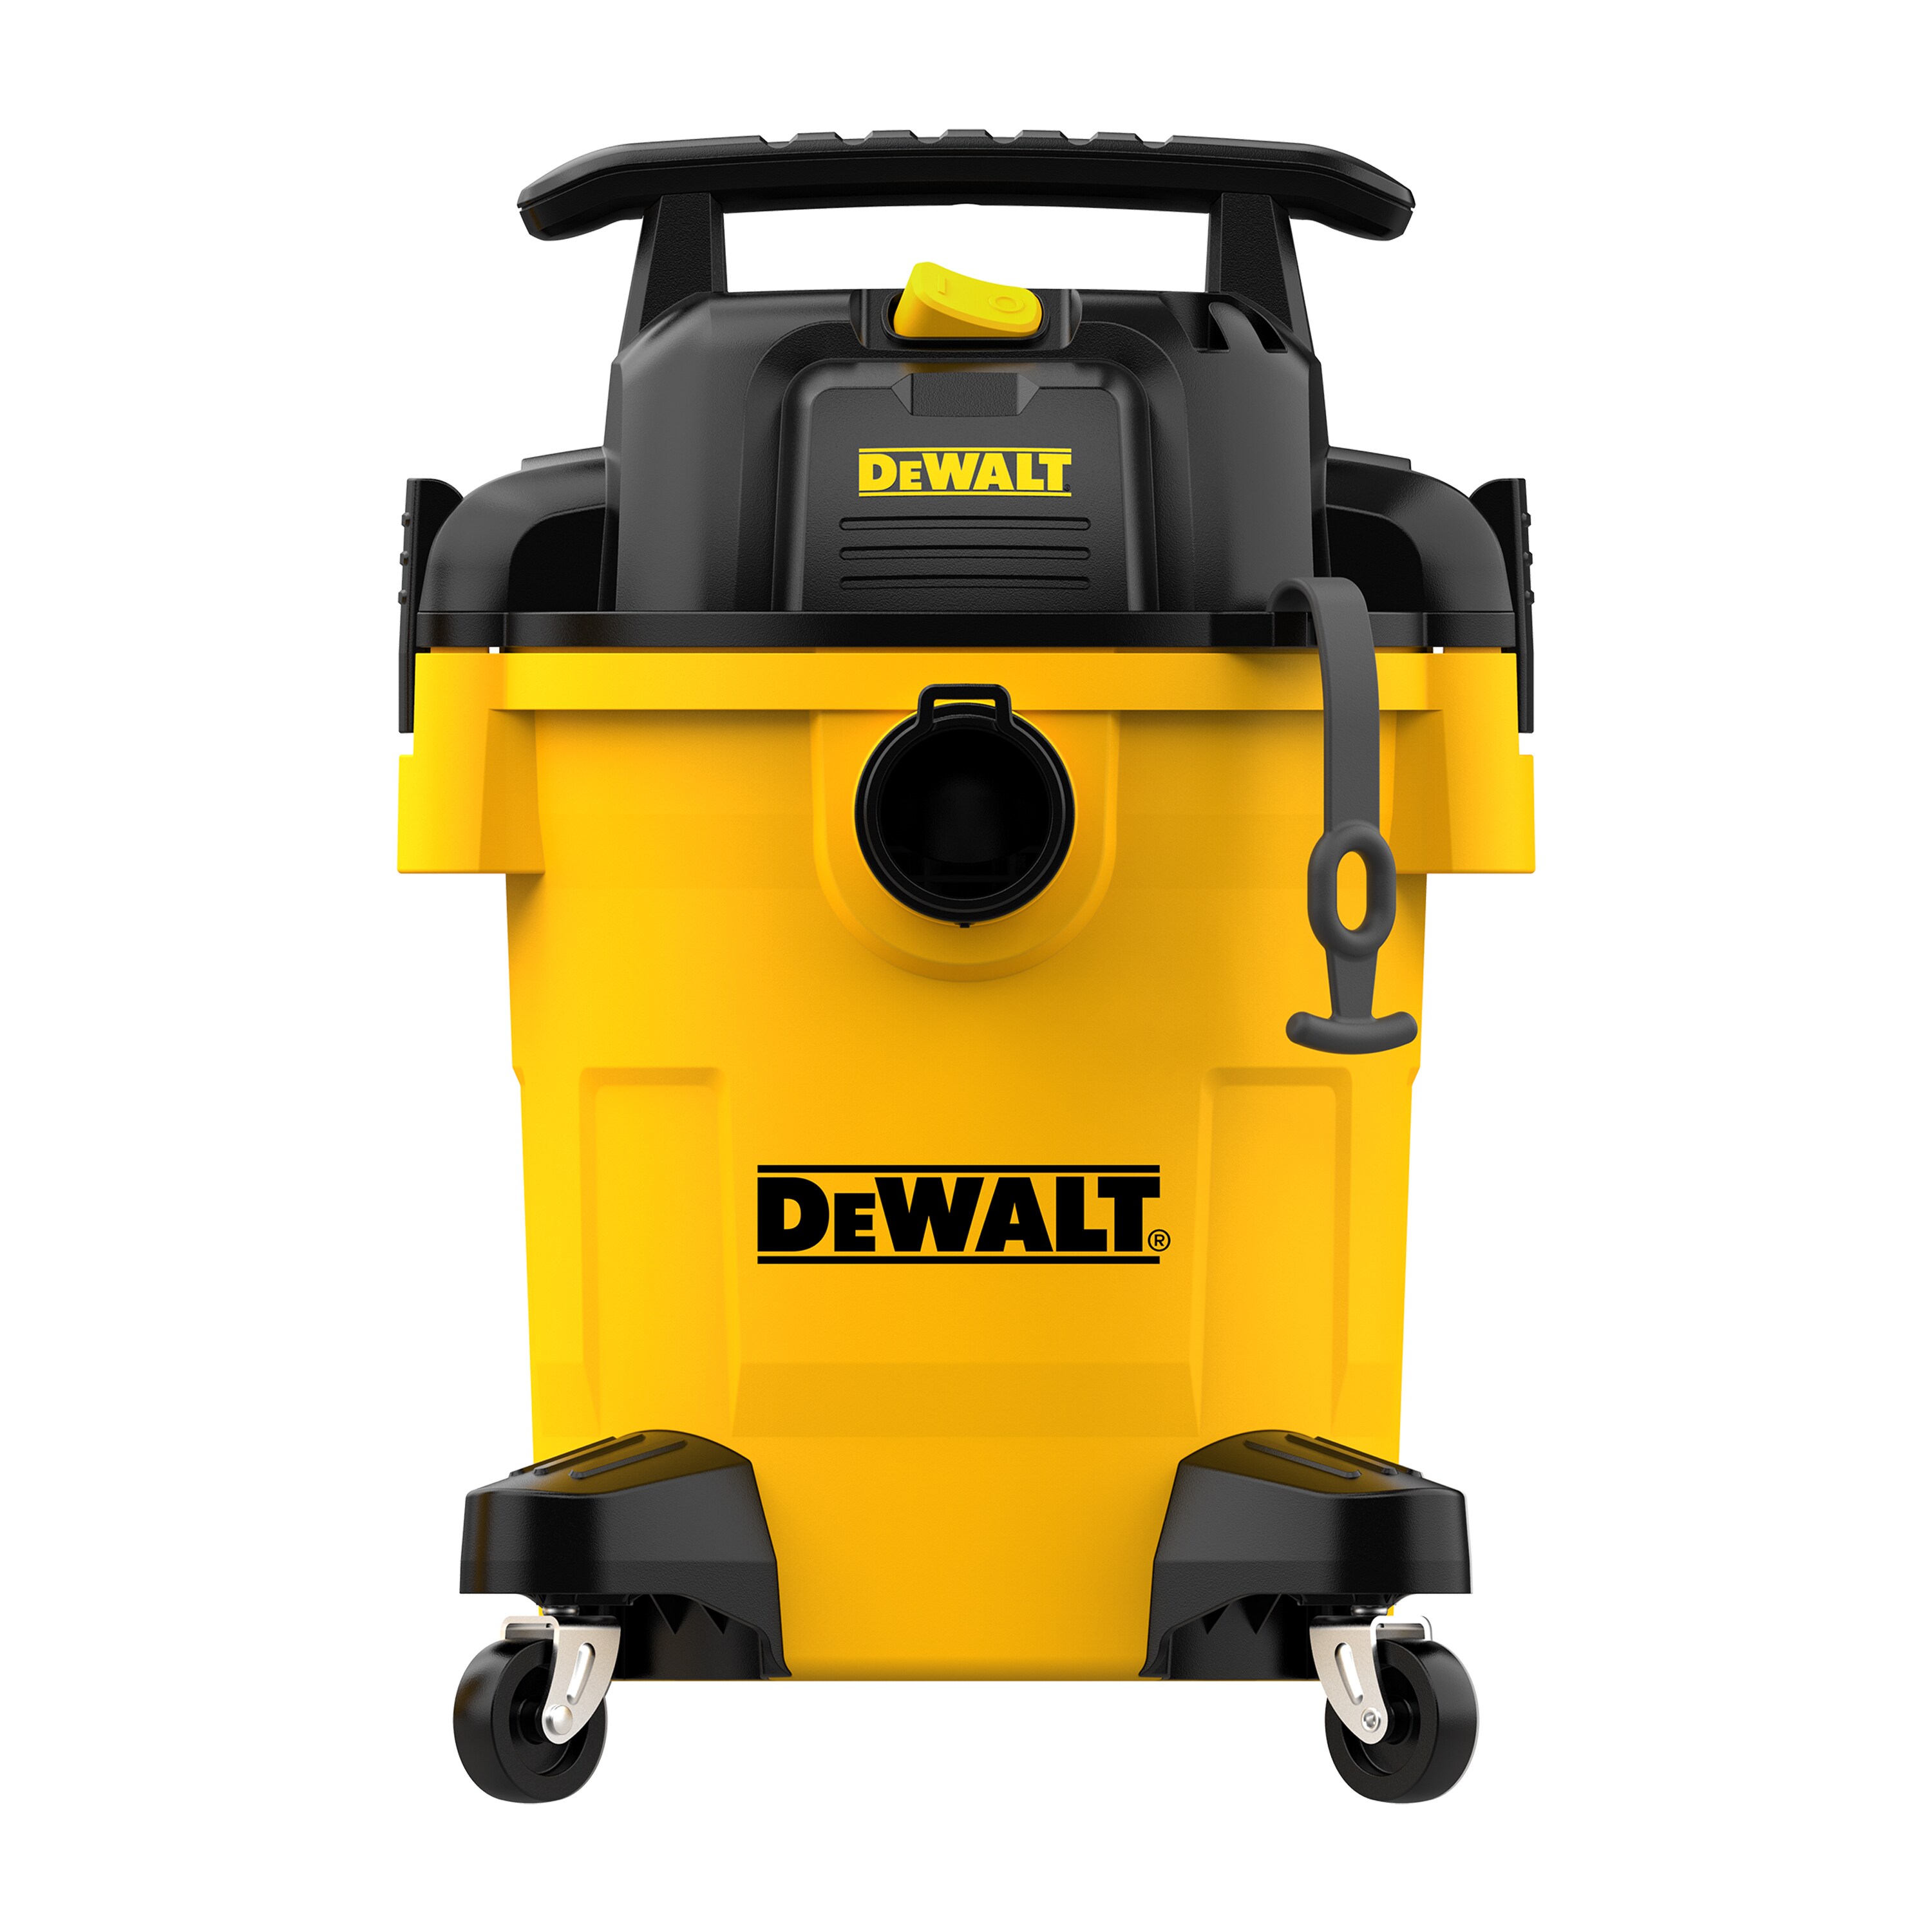 DEWALT 4-Gallons 5-HP Corded Wet/Dry Shop Vacuum with Accessories